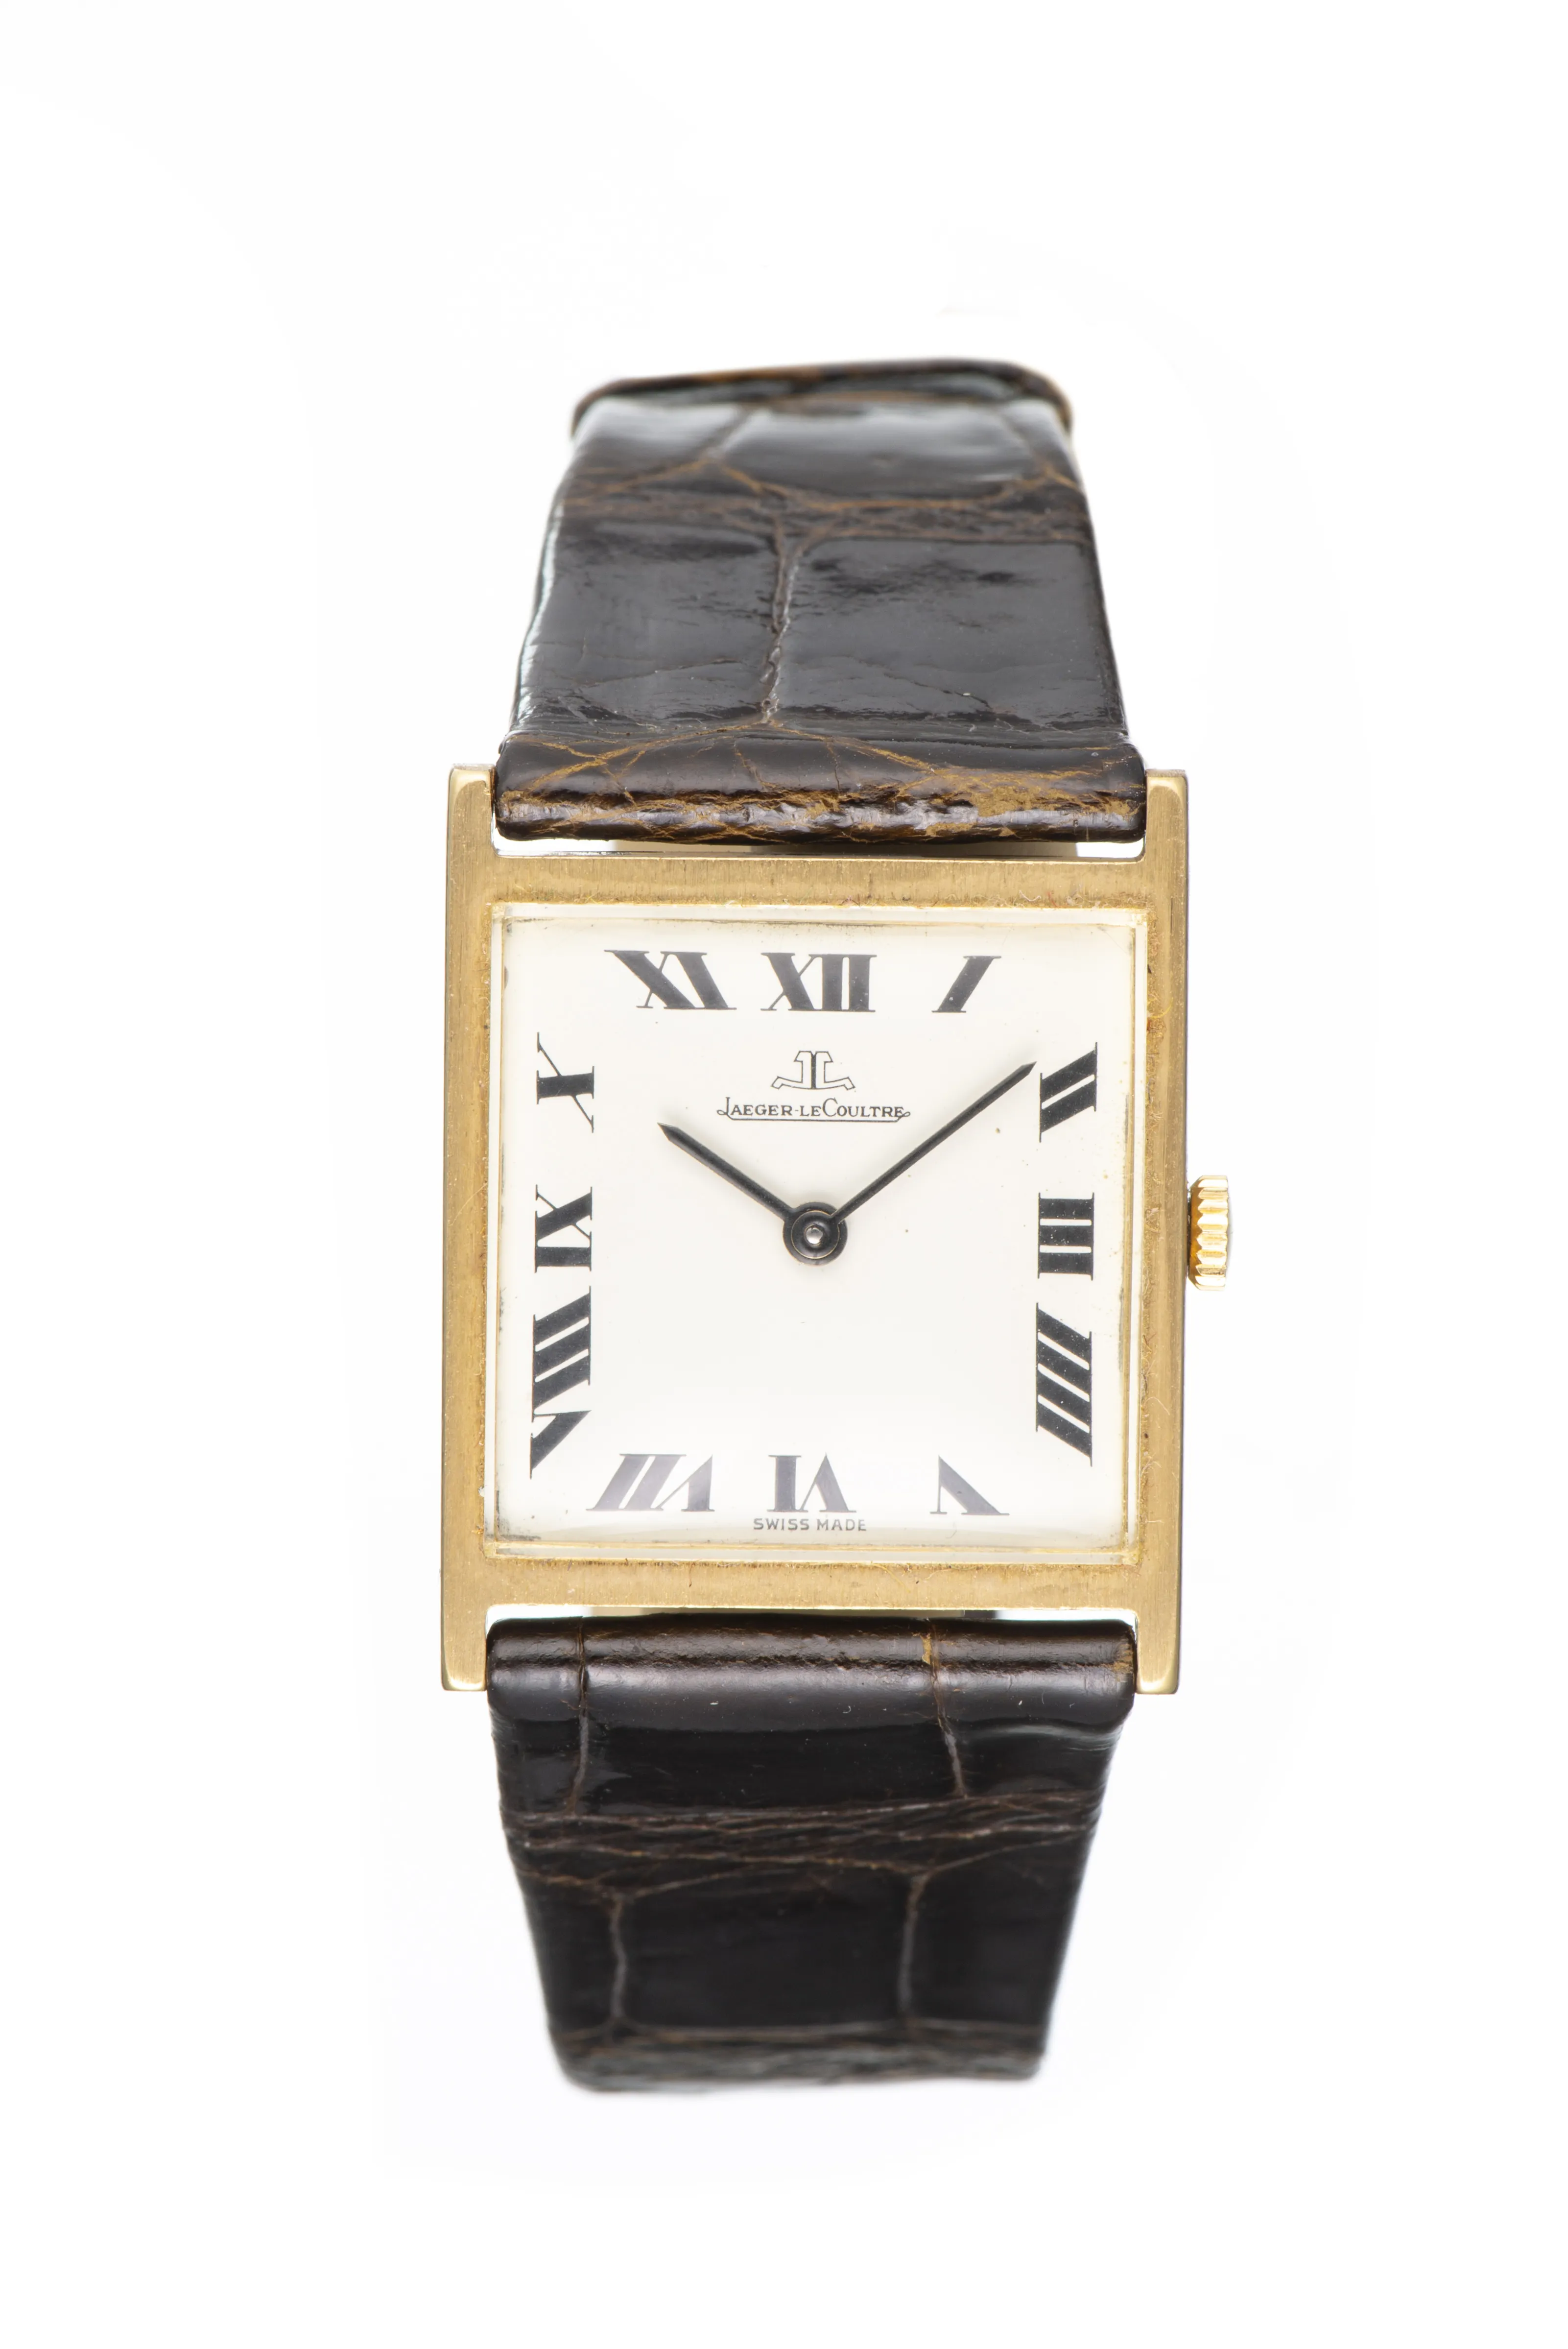 Jaeger-LeCoultre Tank 27mm Yellow gold White